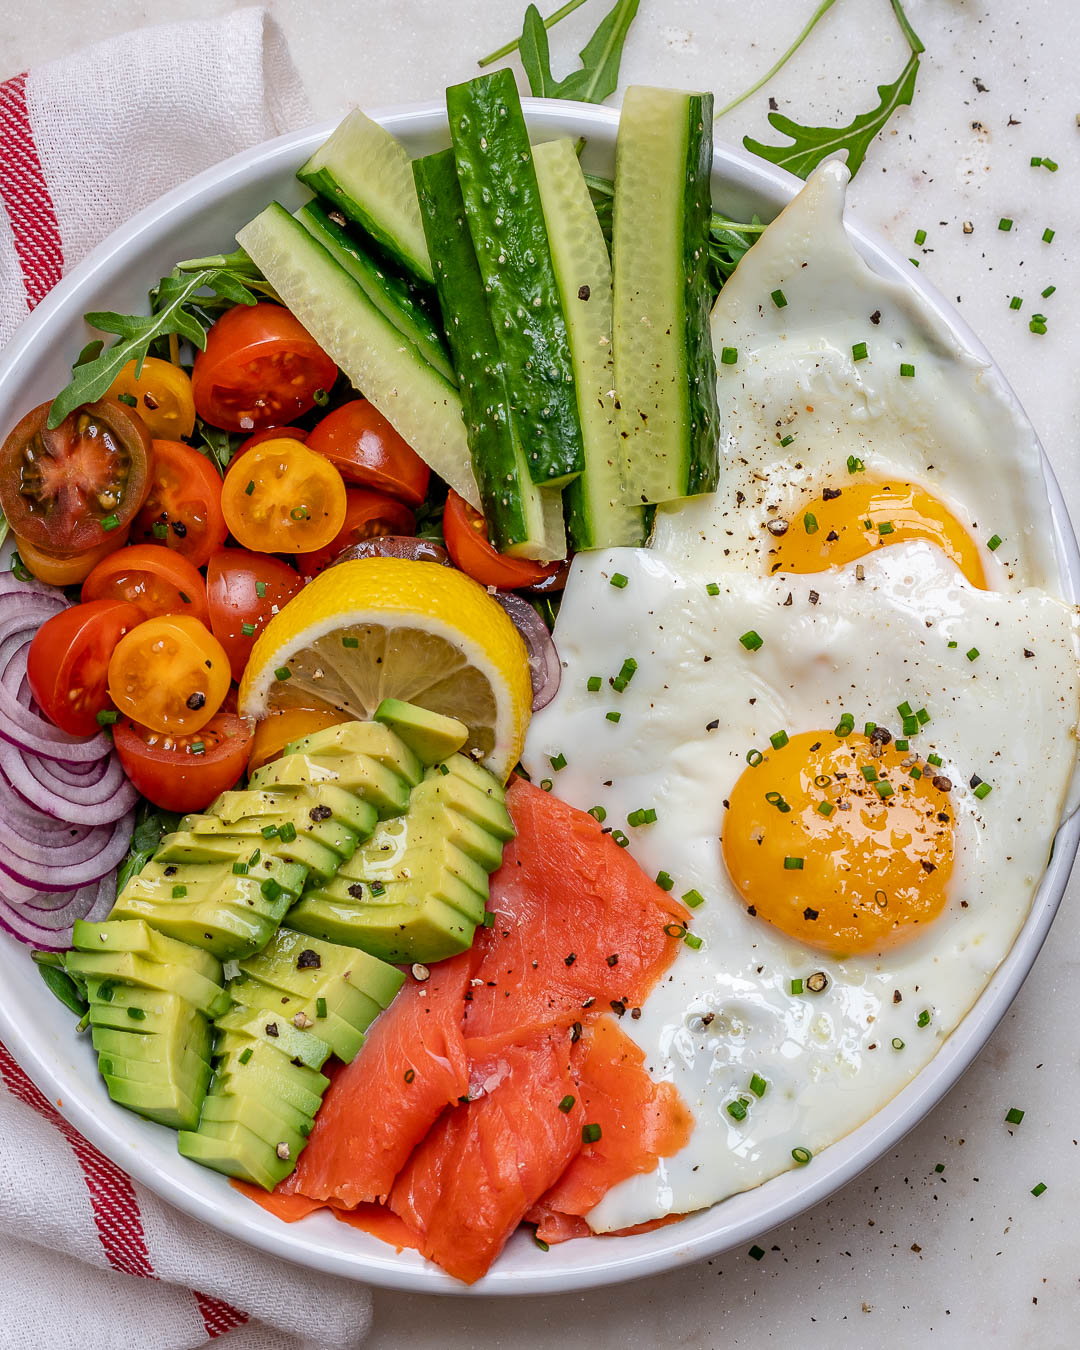 Smoked Salmon Breakfast Bowls for Clean Eating! - The Cookbook Network